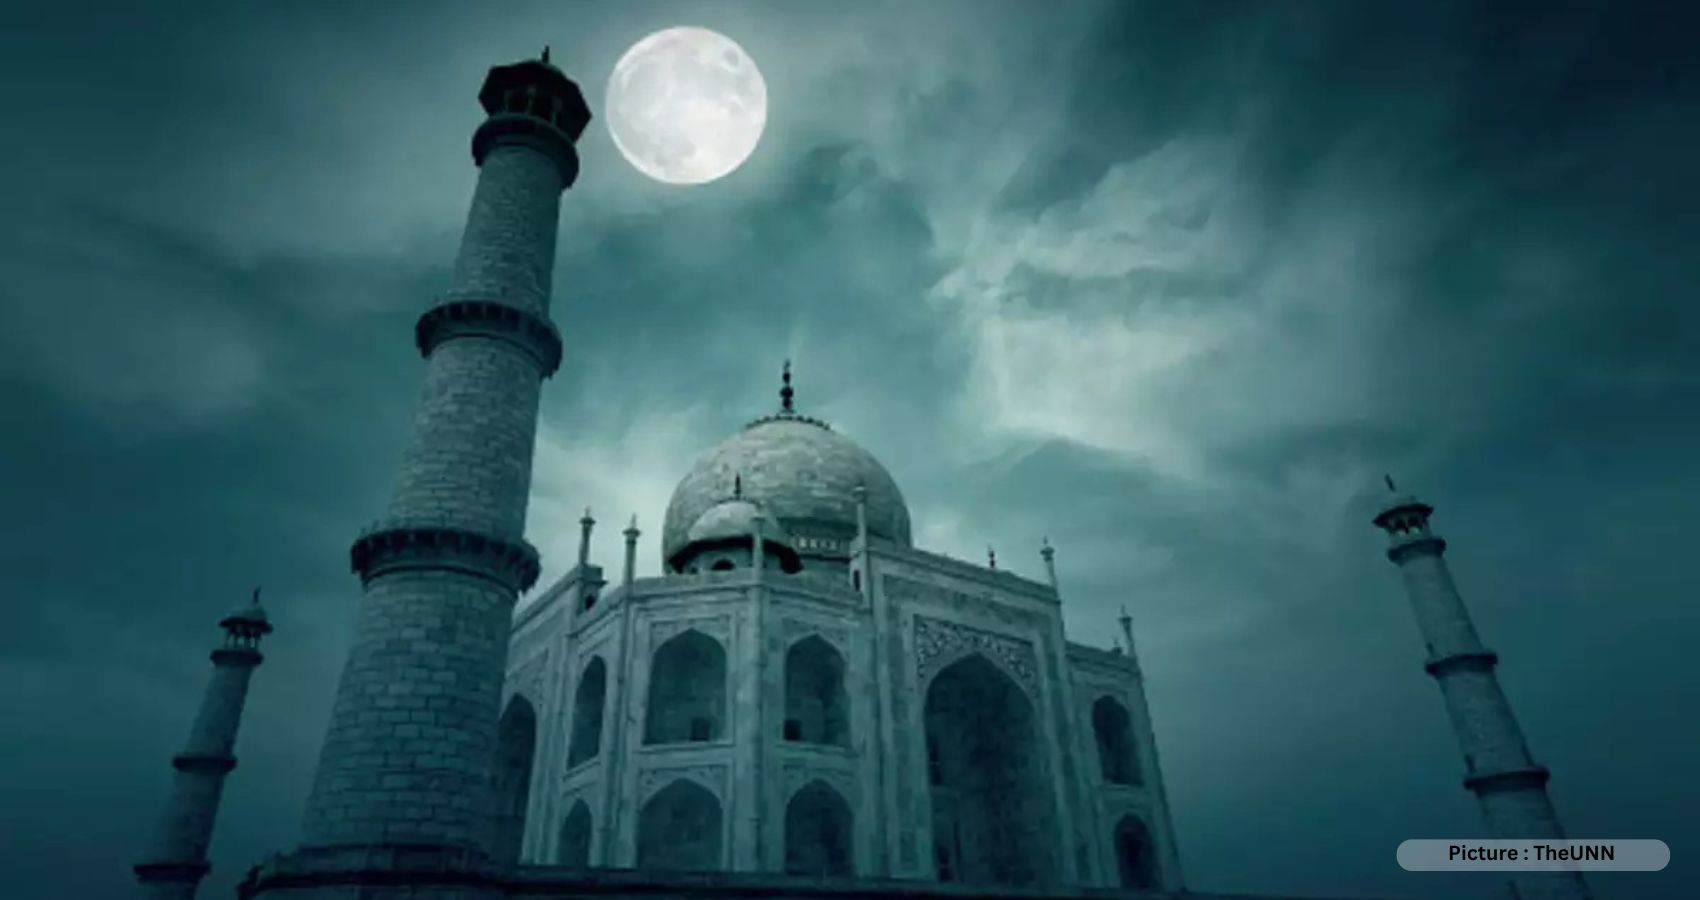 Taj Mahal Night Viewing Tickets Now Available For Online Booking